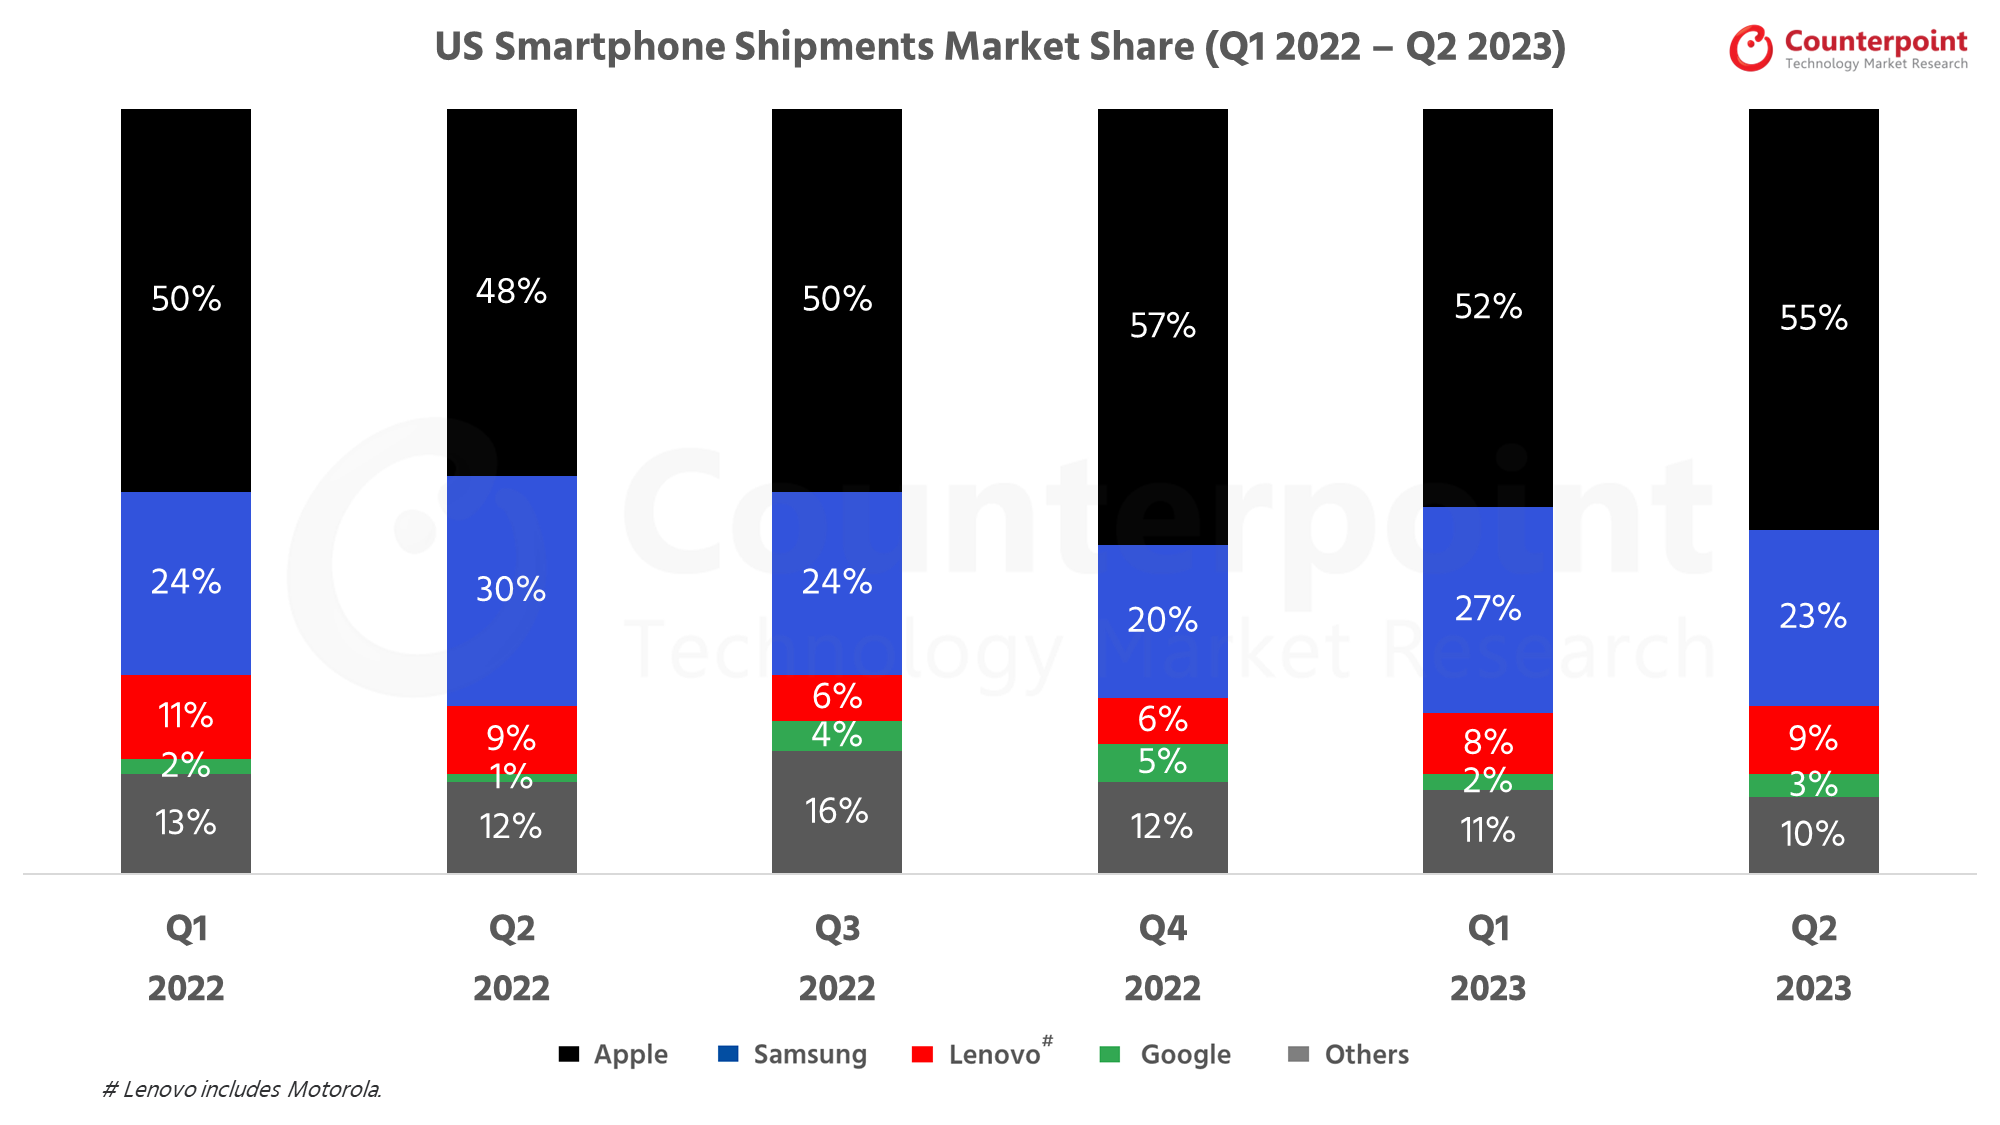 Counterpoint Research US Smartphone Market Share Q2 2023